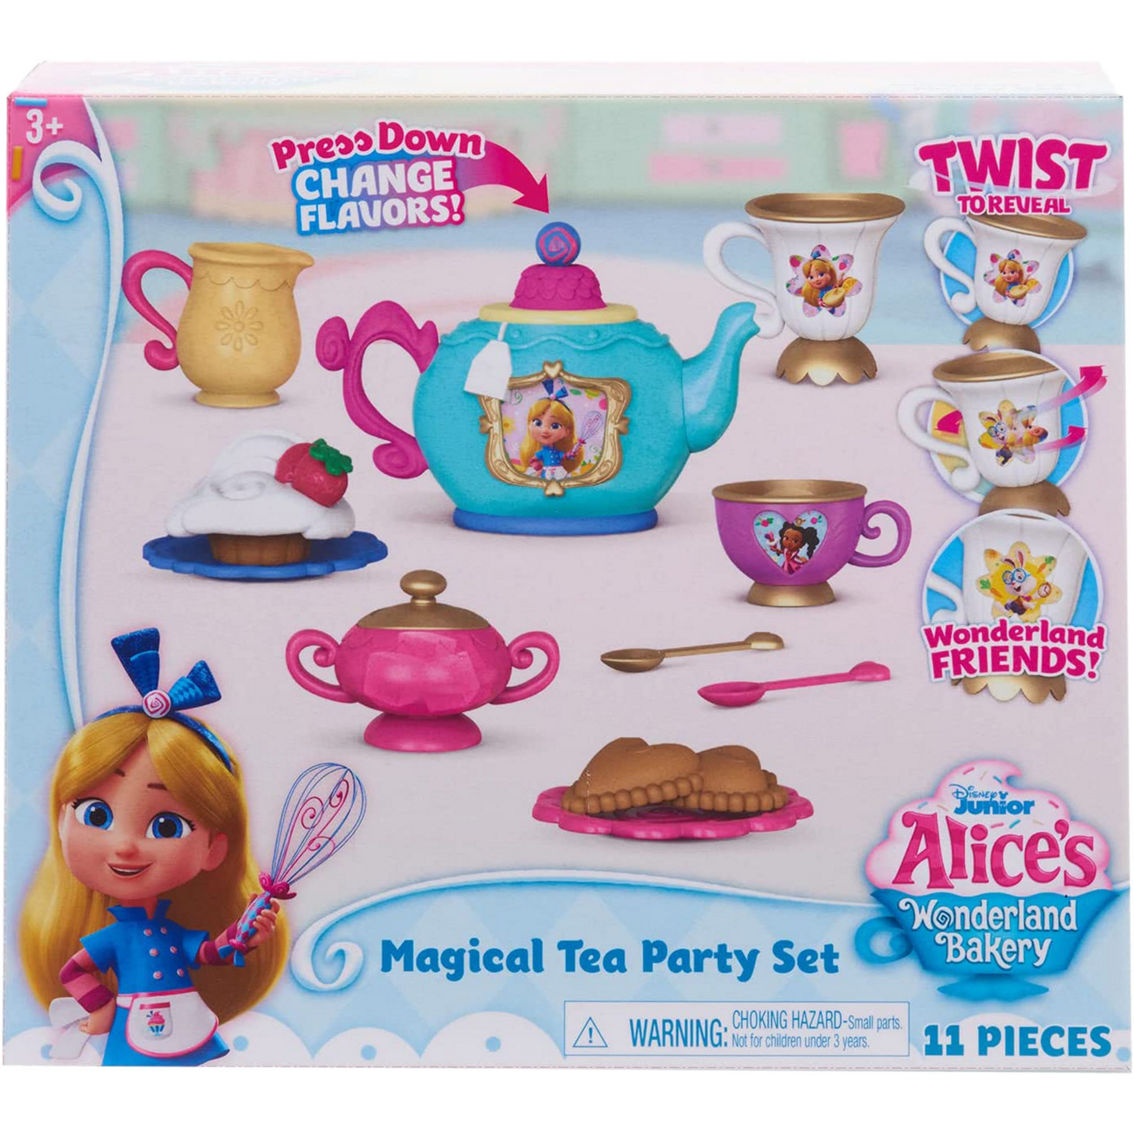 Classic Doll Play Set - Disney Alice in Wonderland Tea Party - Alice-in- Wonderland.net shop